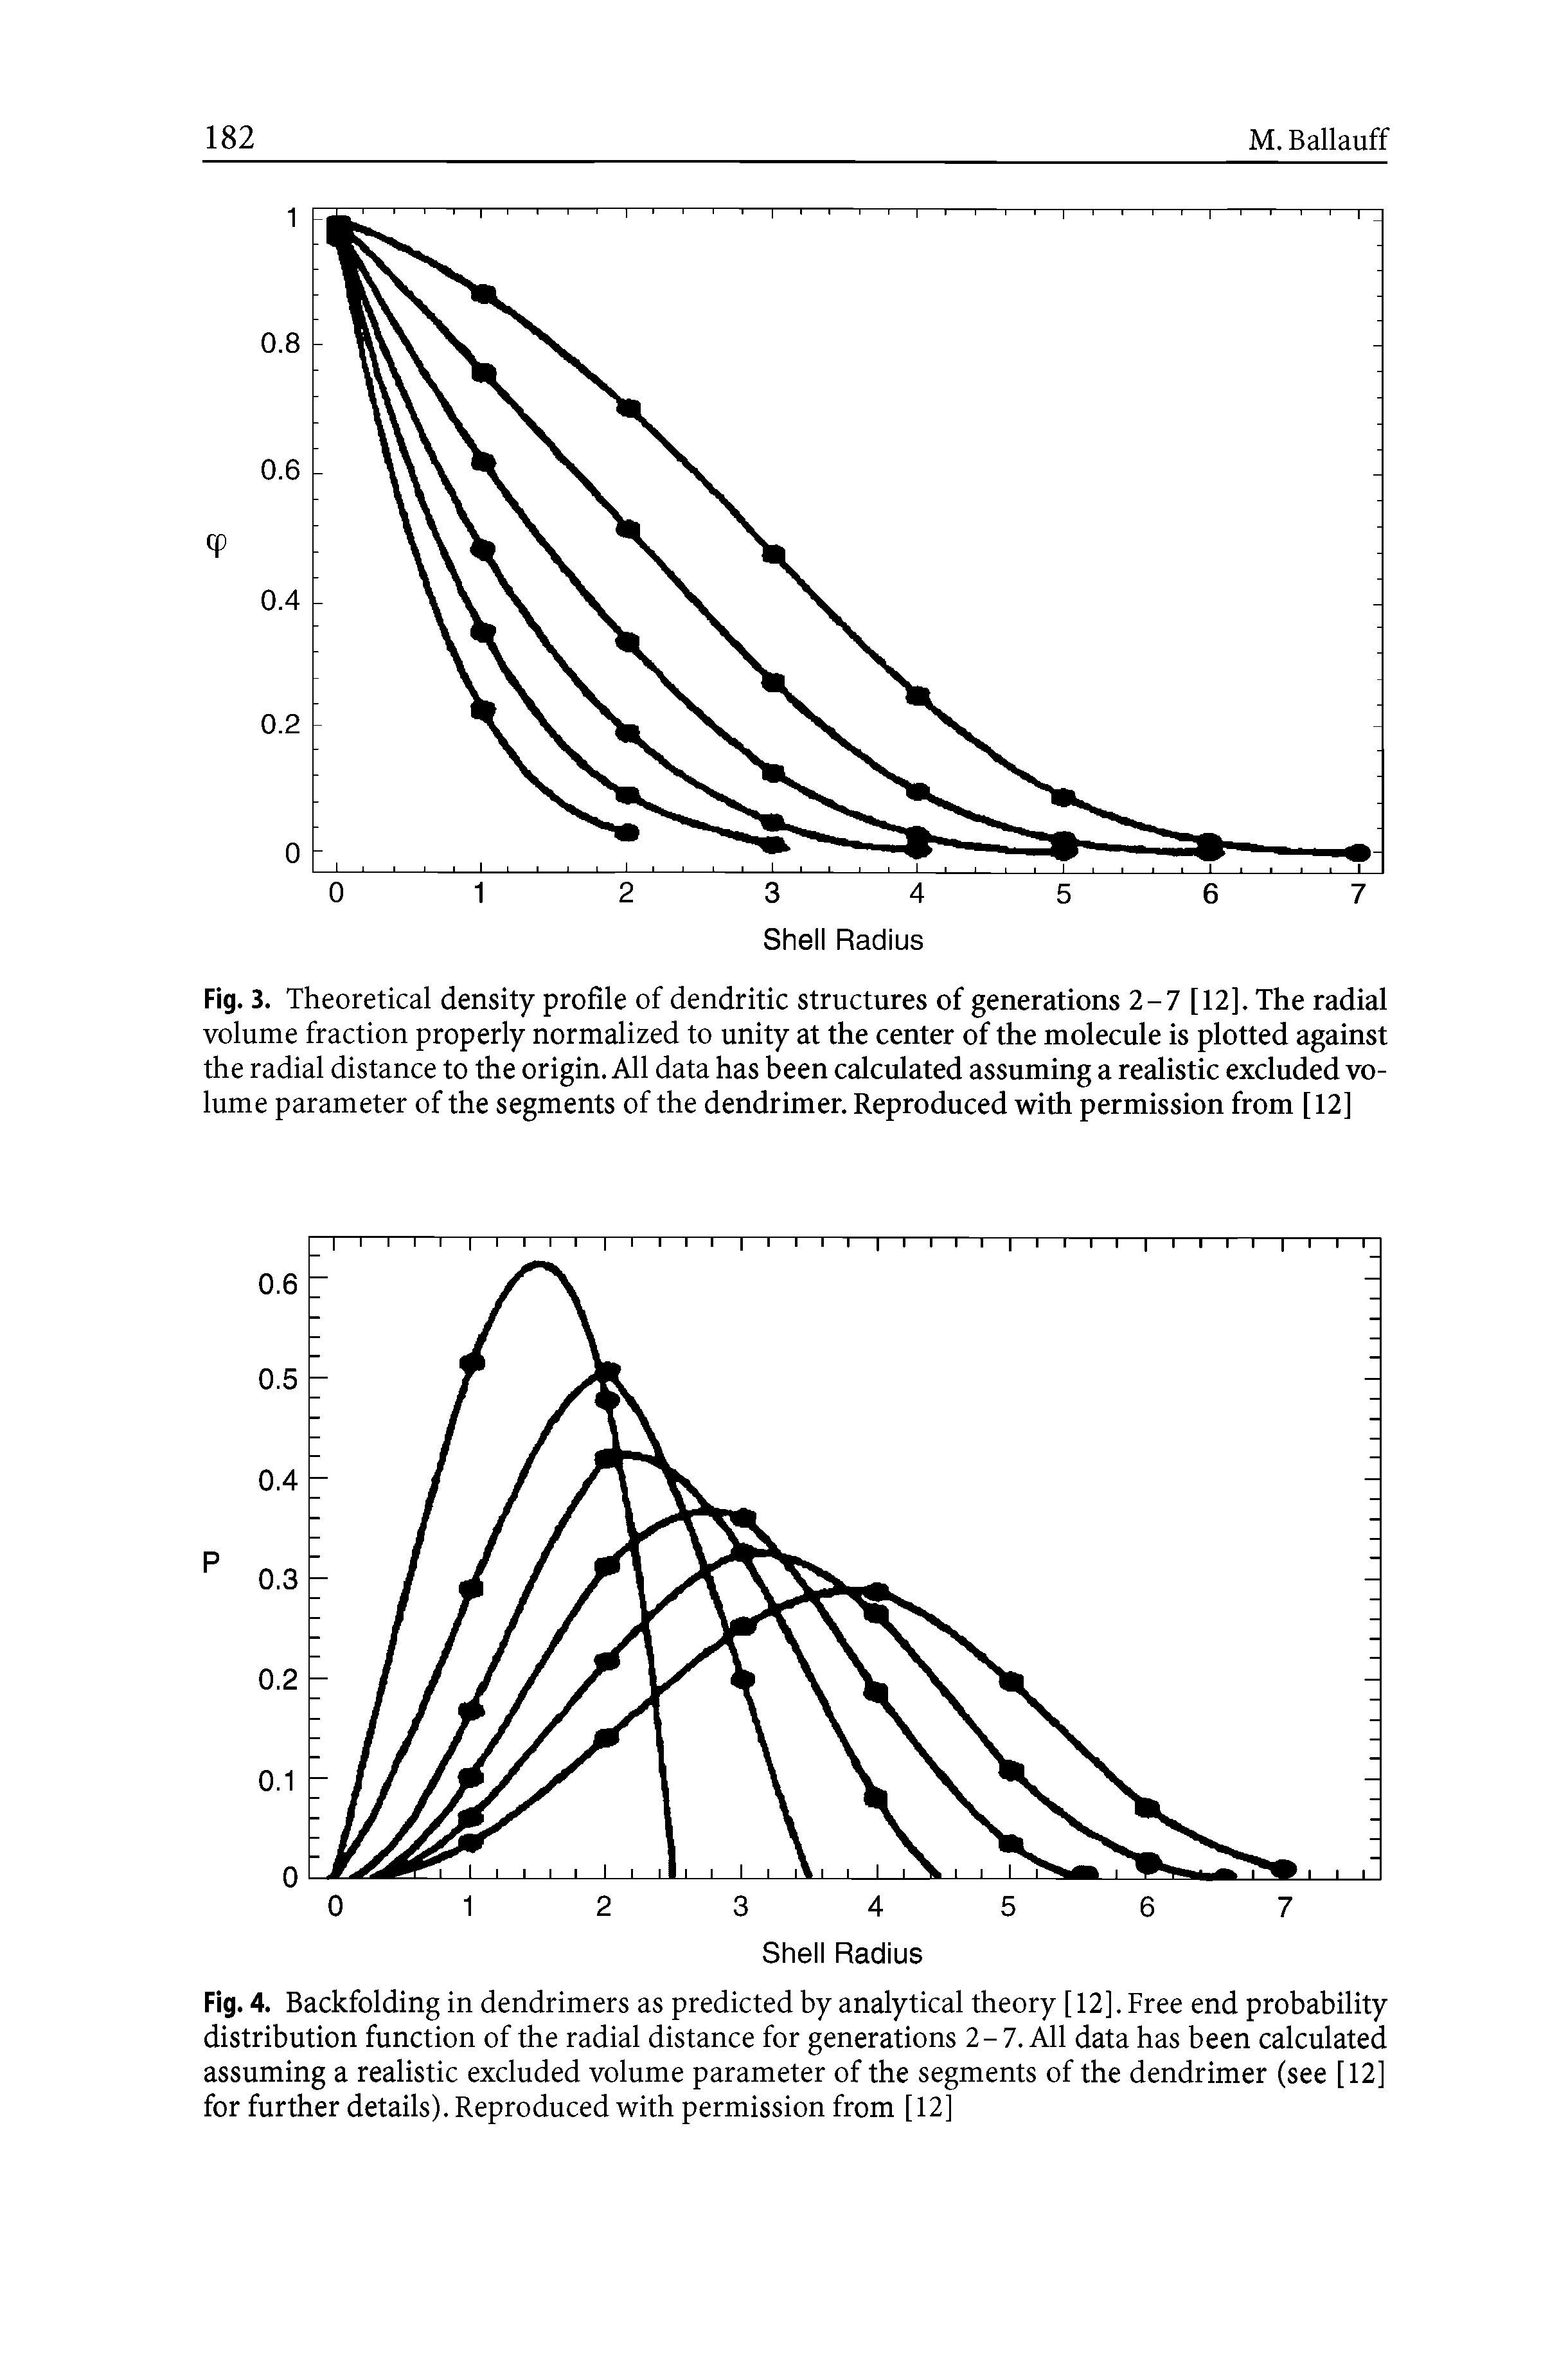 Fig. 4. Backfolding in dendrimers as predicted by analytical theory [12]. Free end probability distribution function of the radial distance for generations 2-7. All data has been calculated assuming a realistic excluded volume parameter of the segments of the dendrimer (see [12] for further details). Reproduced with permission from [12]...